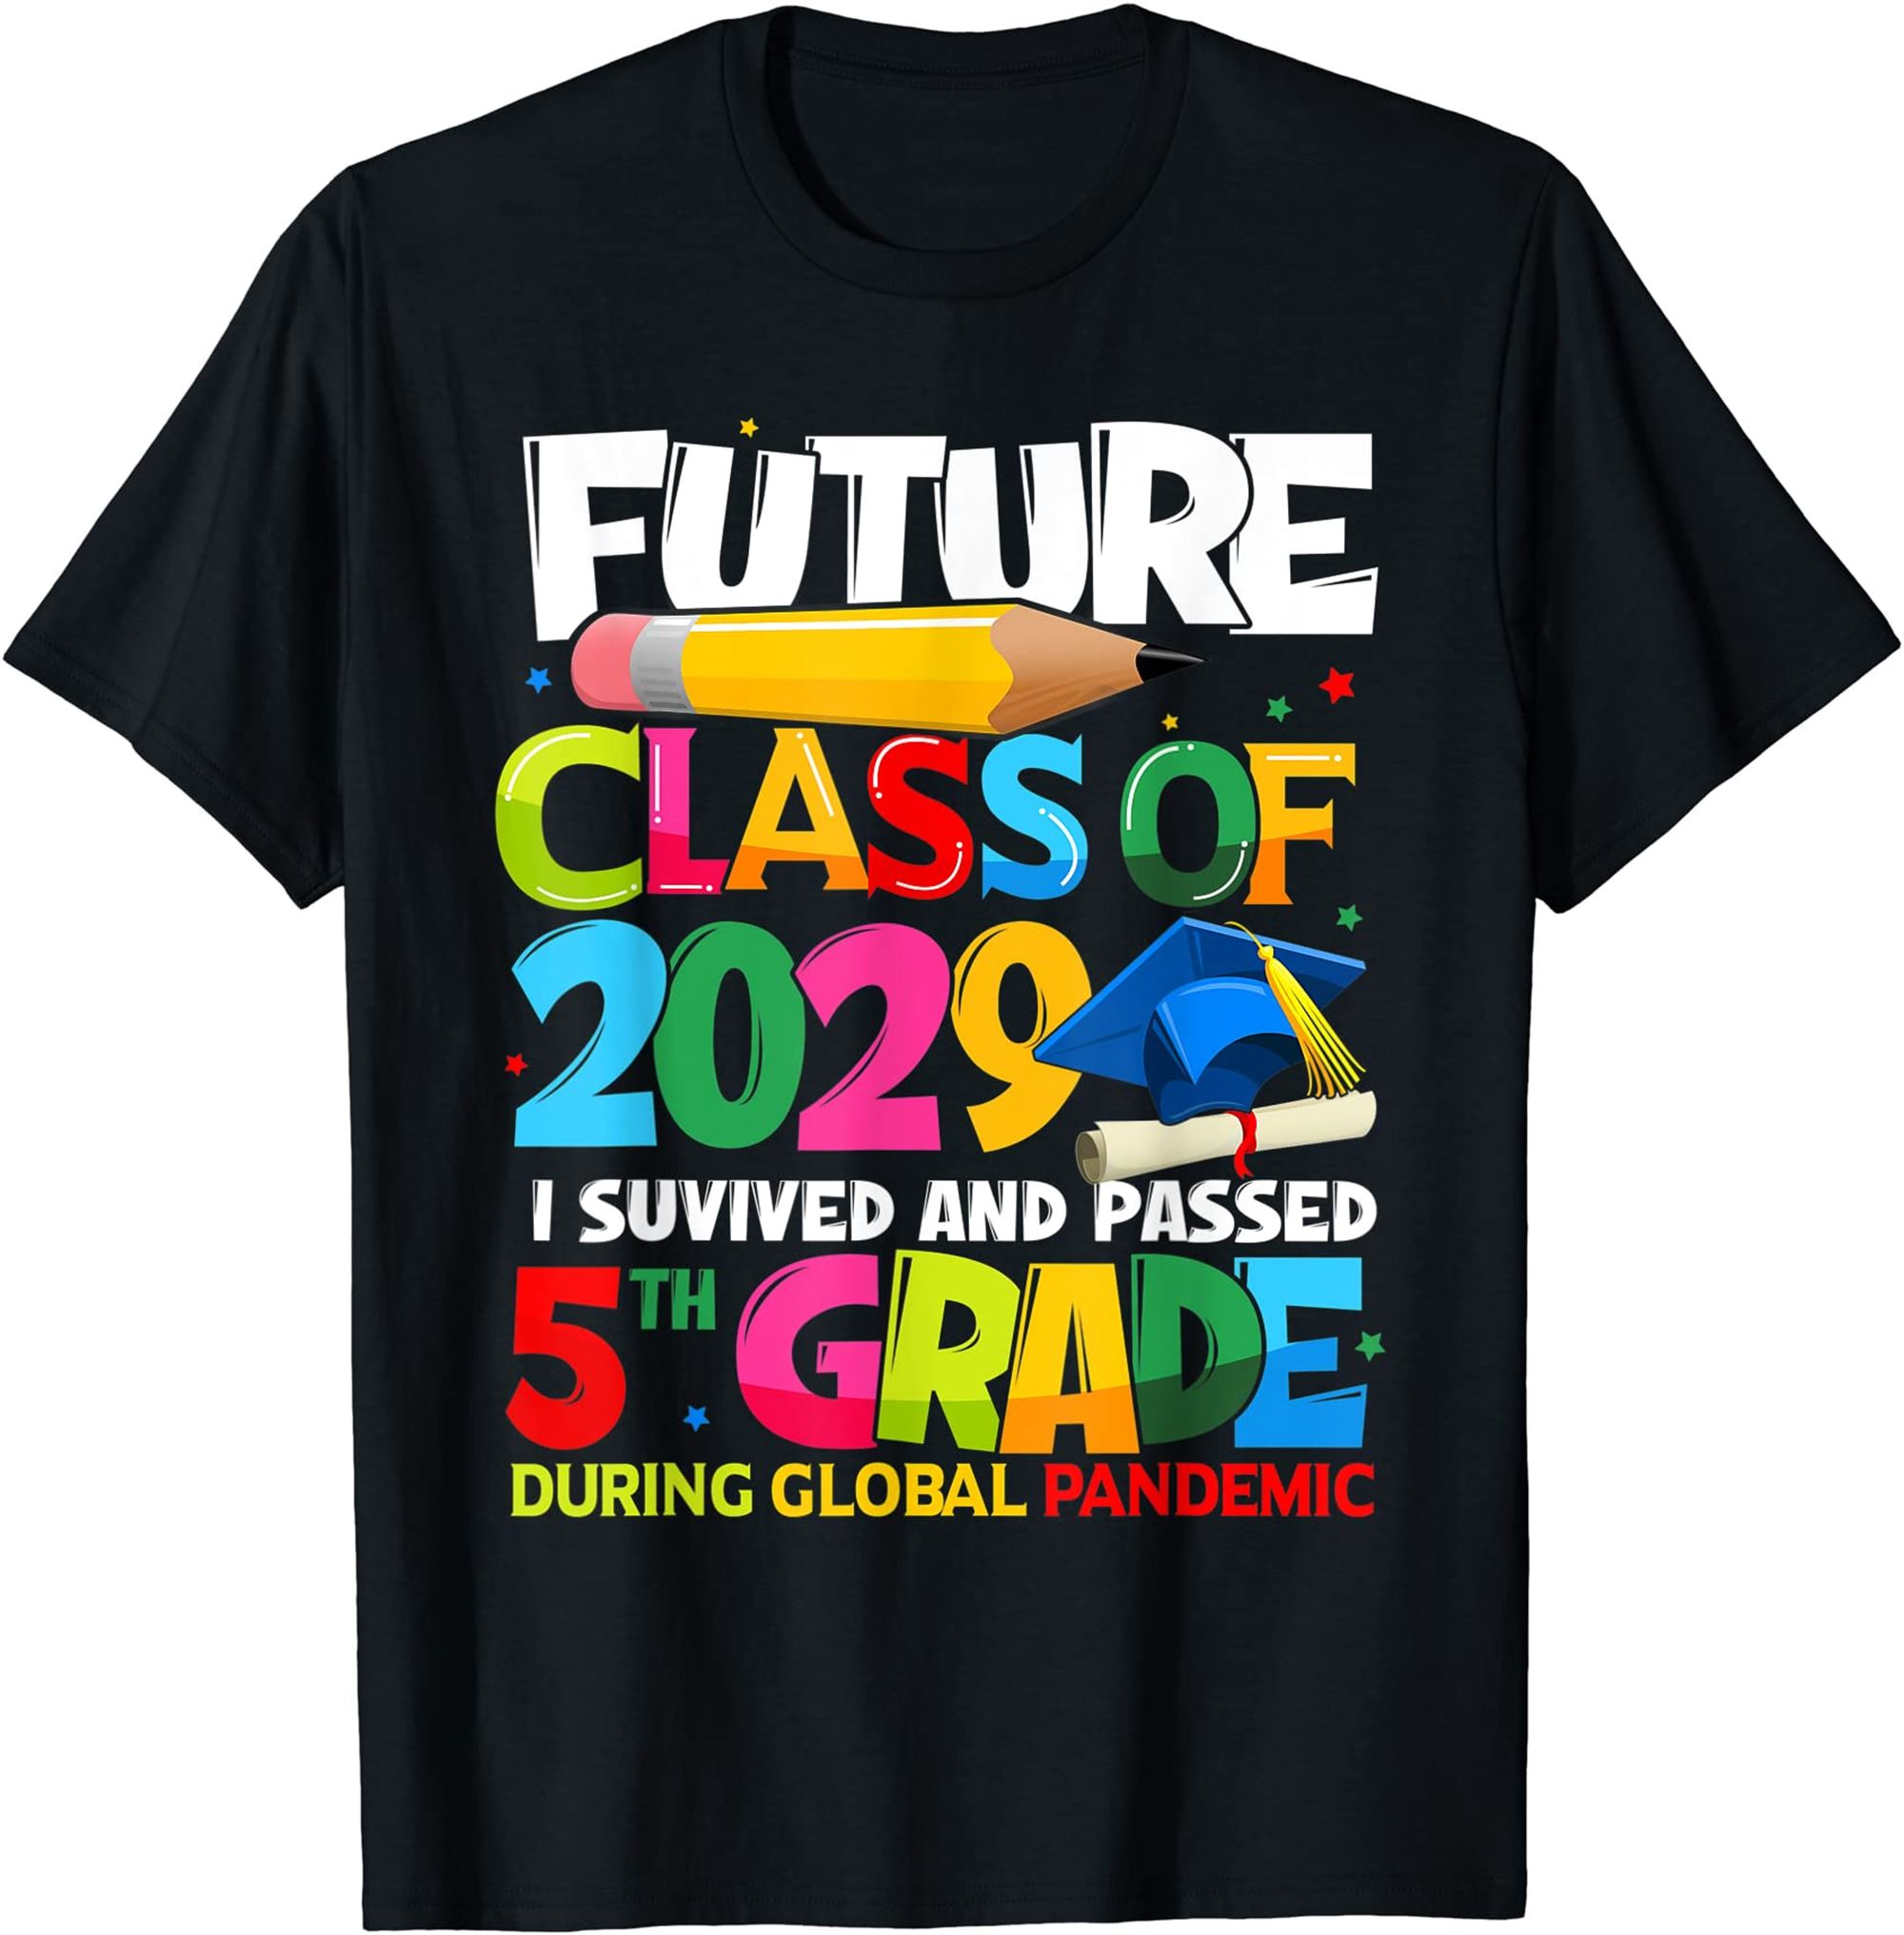 Future Class Of 2029 I Survived Passed 5th Grade Graduation T-shirt Size Up To 5xl